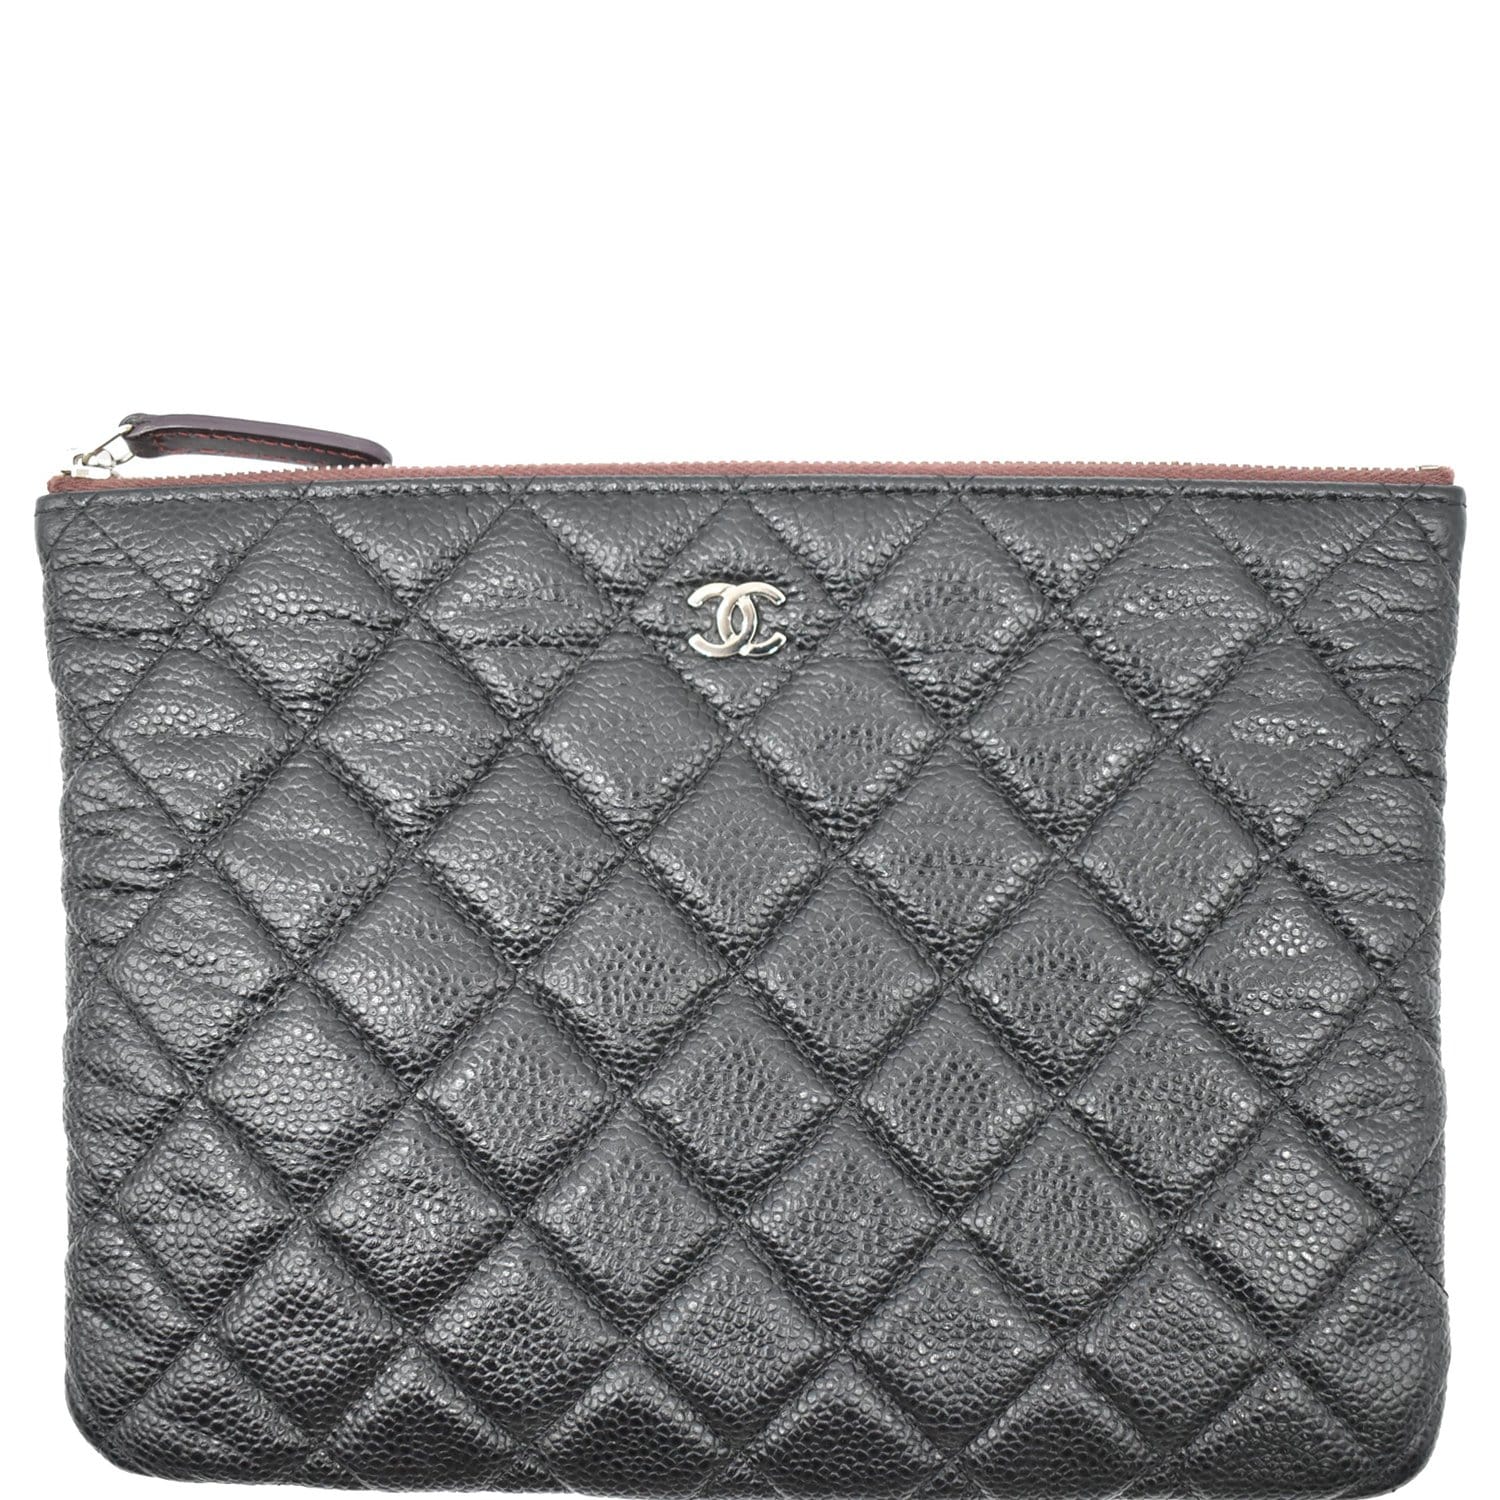 CHANEL Caviar Leather O-Case Zip Pouch Black - 10% OFF